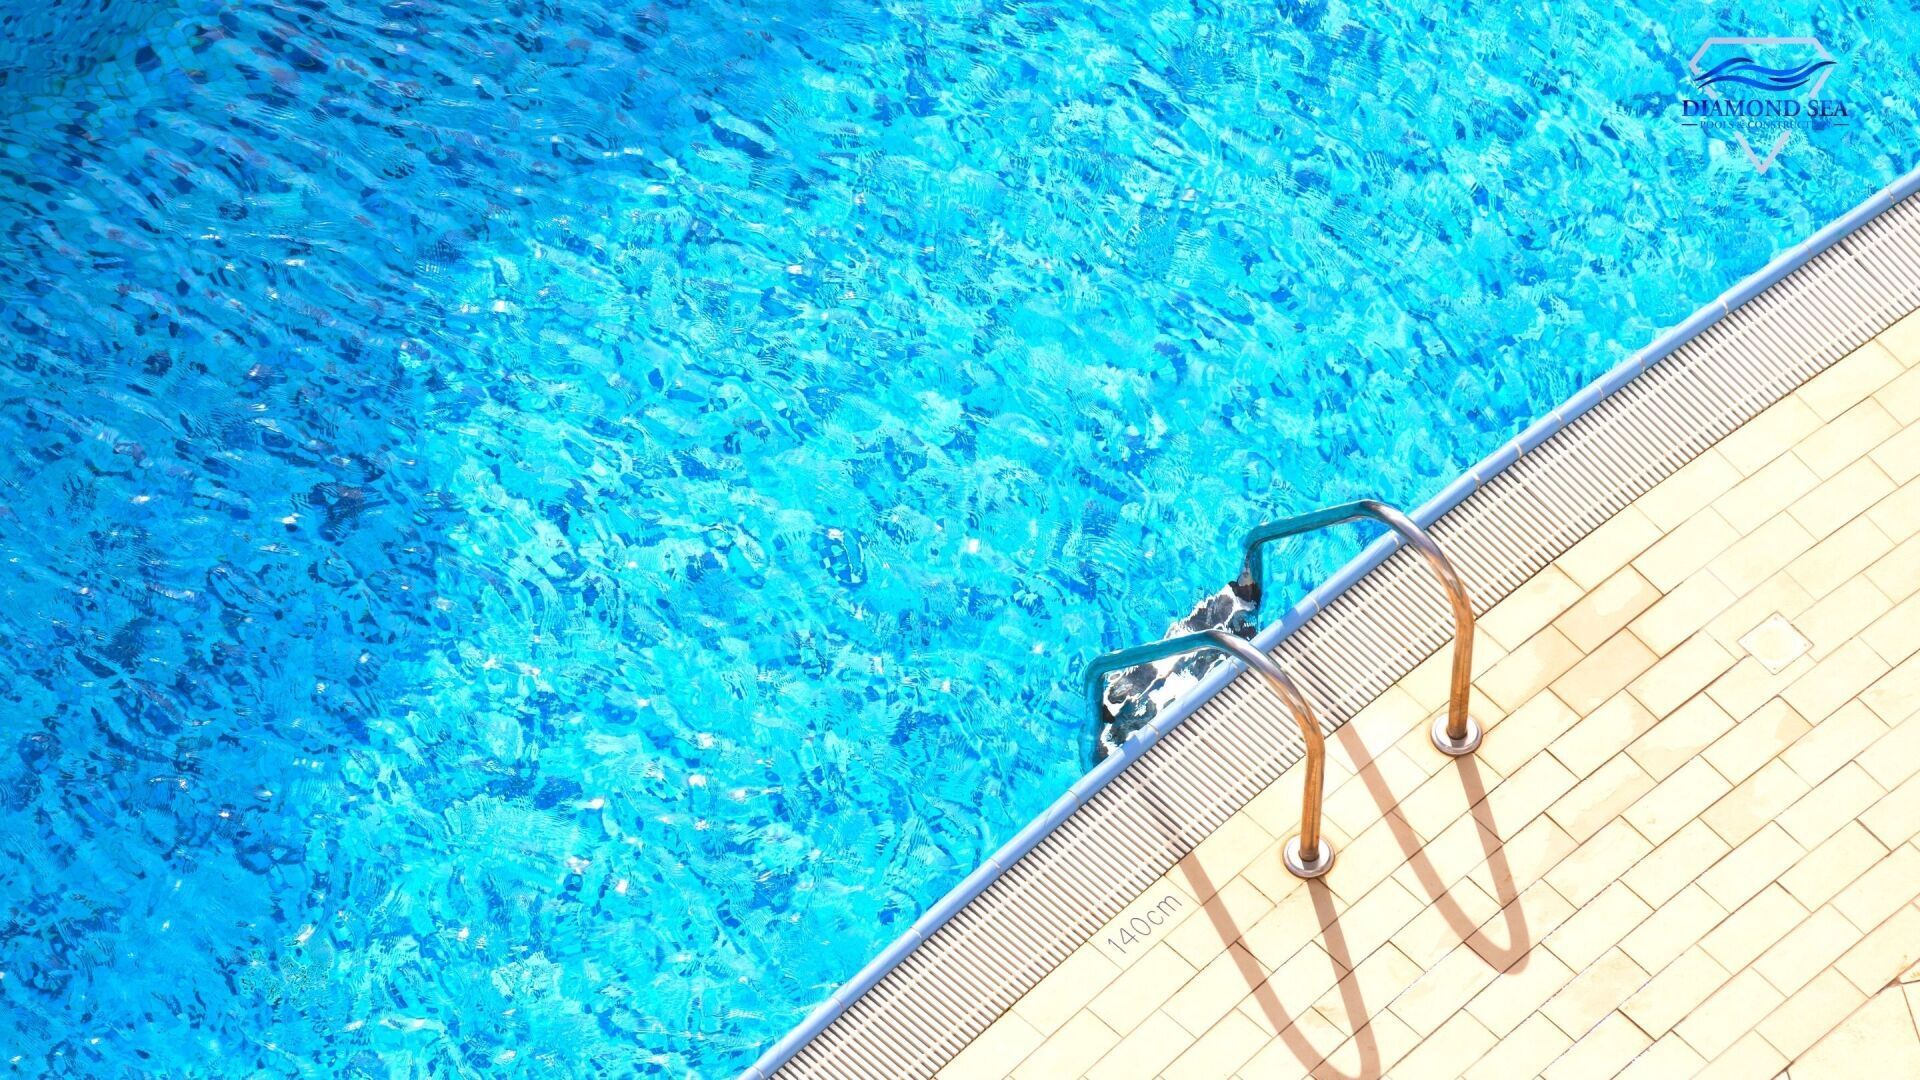 View of an Austin swimming pool from above. Edge of pool with ladder